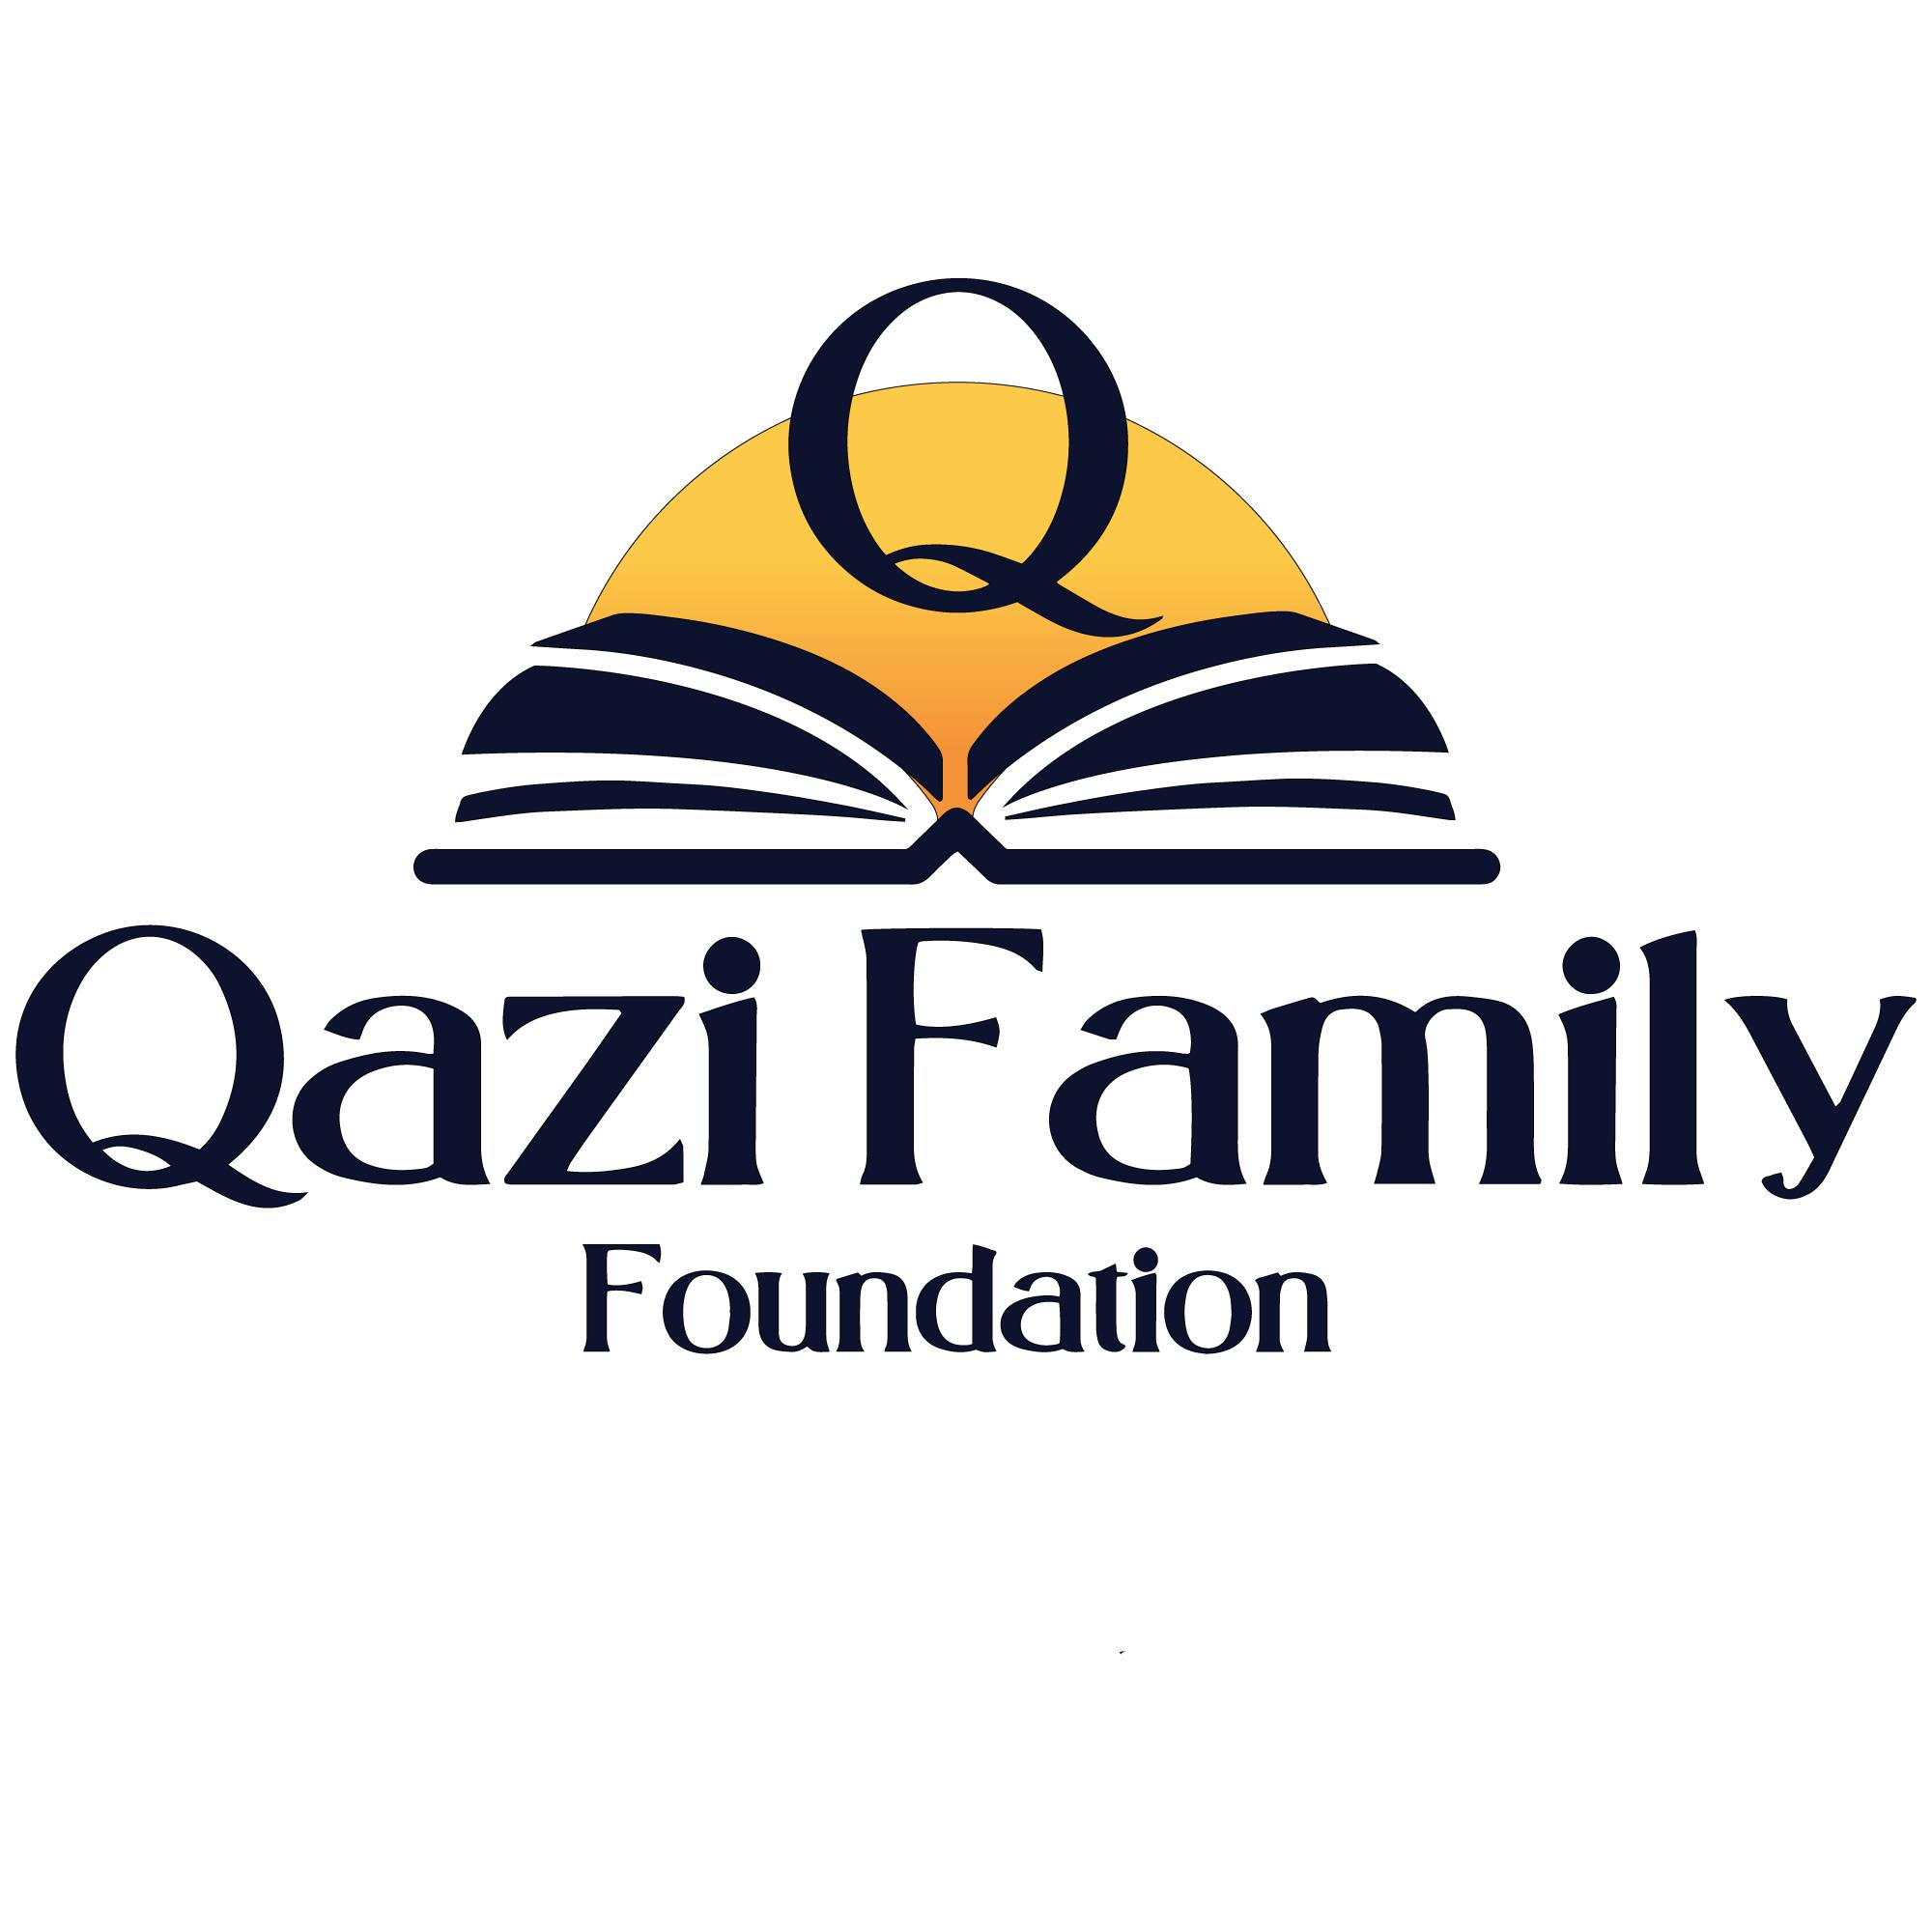 Qazi Family Foundation, Tuesday, January 10, 2023, Press release picture